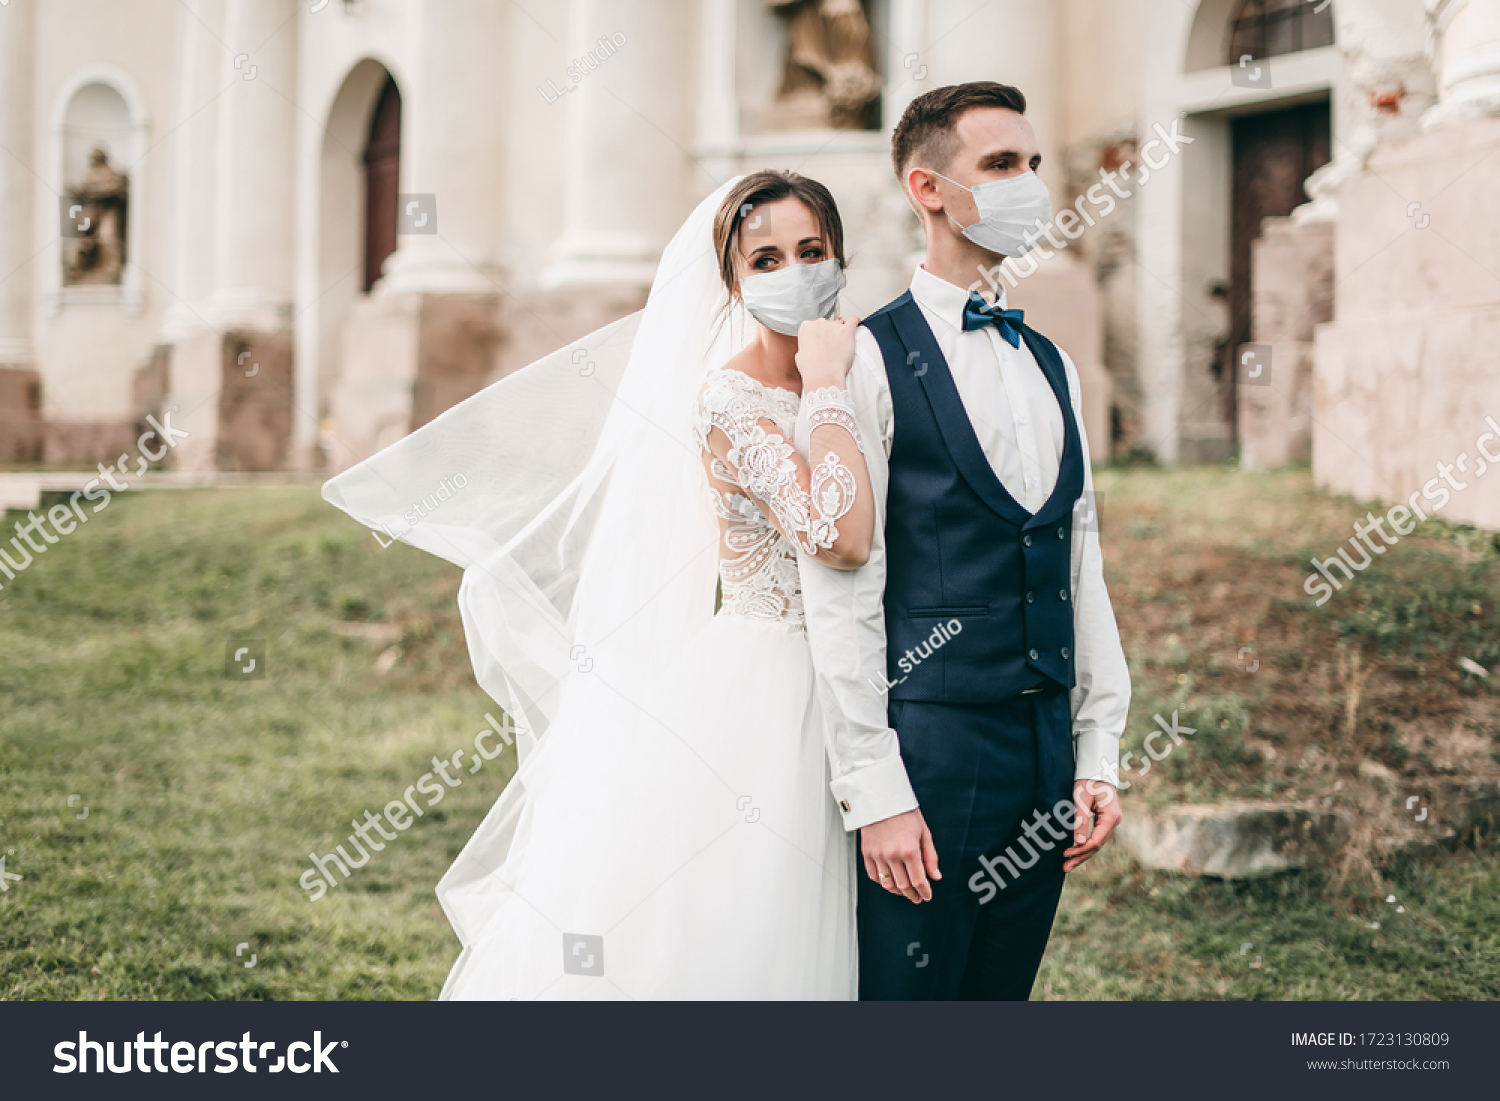 Young loving brides walking and hugging in the city near the church in medical masks with a bouquet of roses during quarantine on their wedding day. Coronavirus, disease, protection, illness, corona #1723130809